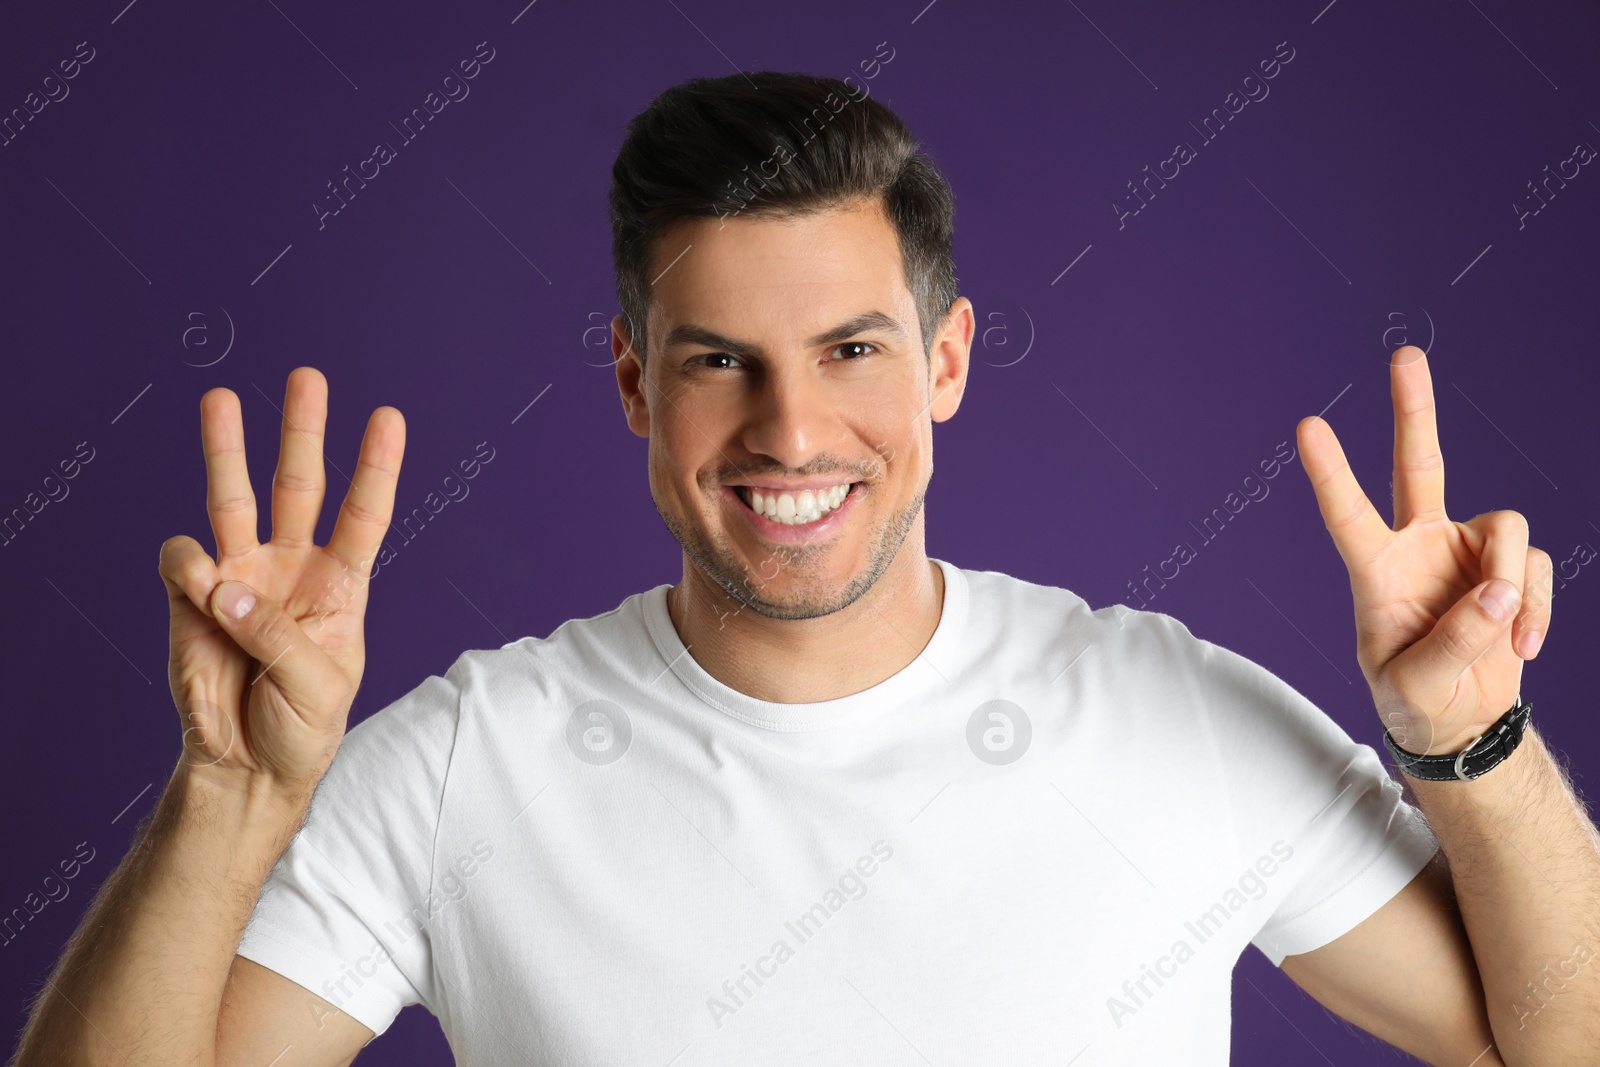 Photo of Man showing number five with his hands on purple background